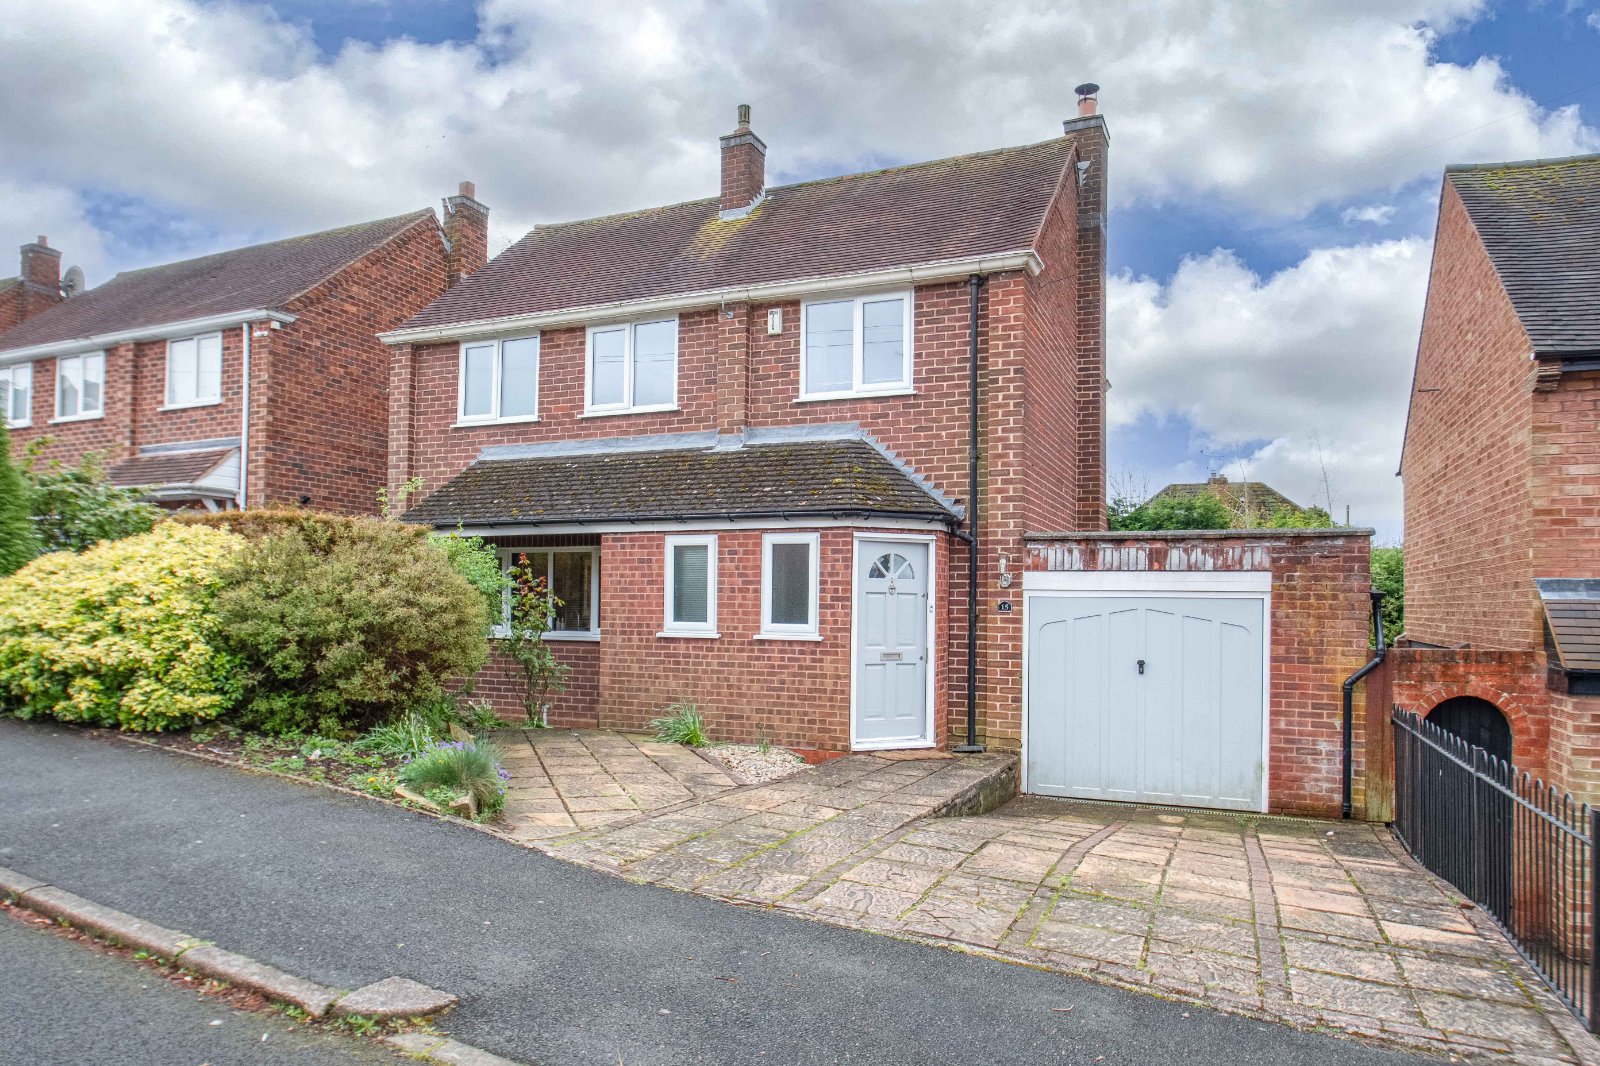 3 bed house for sale in Byron Road, Redditch - Property Image 1